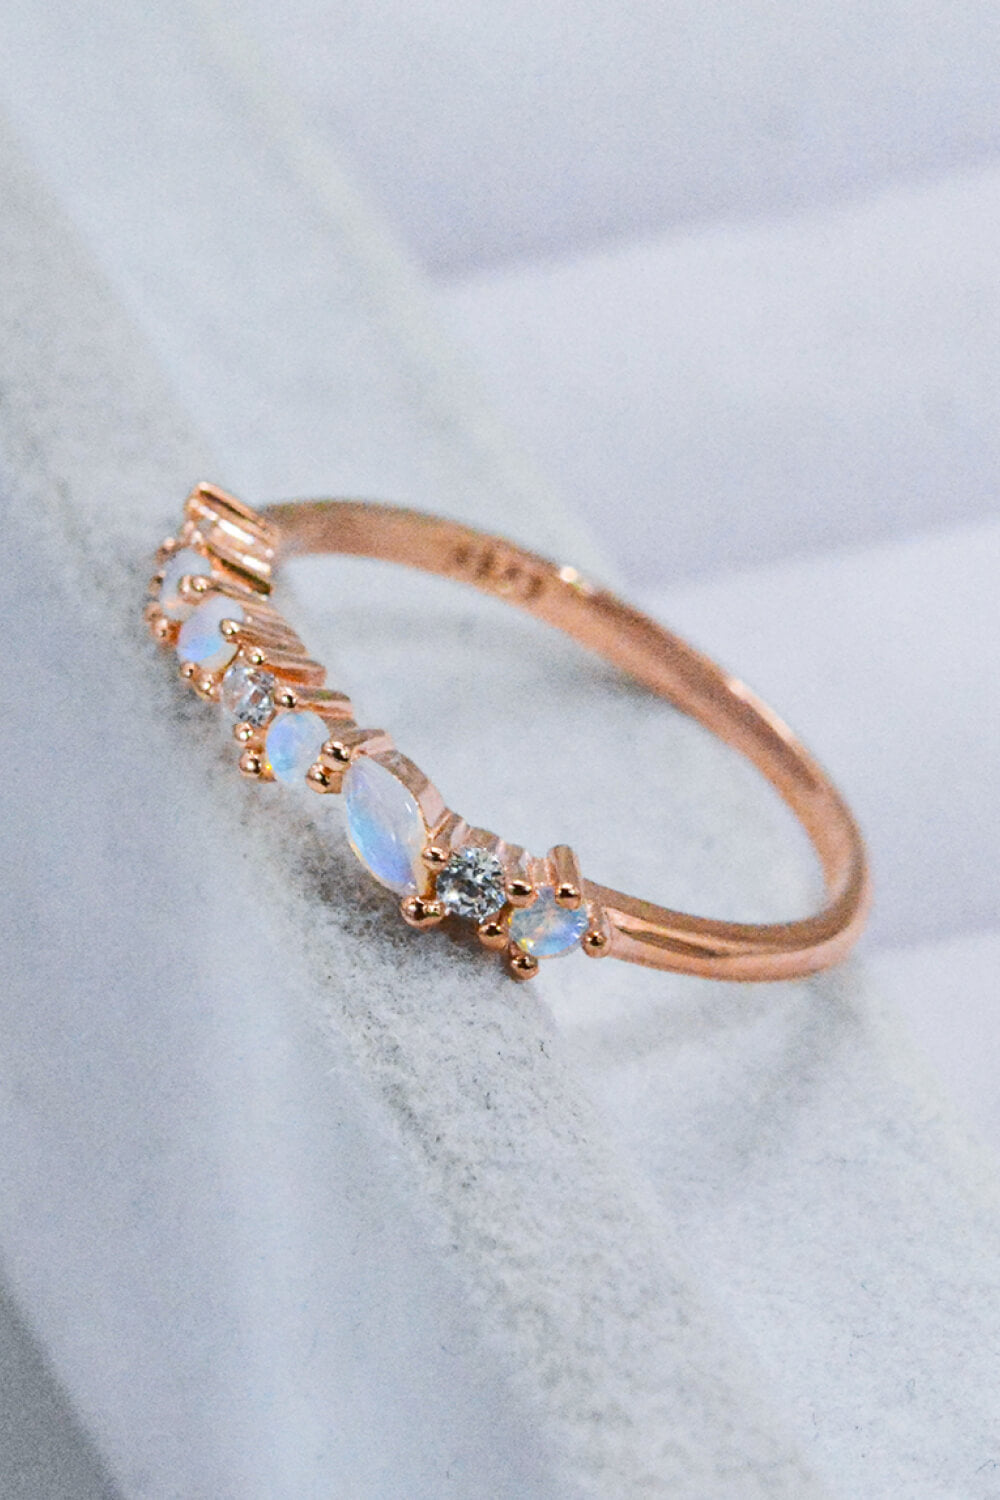 Moonstone and Zircon Decor Ring - Cheeky Chic Boutique